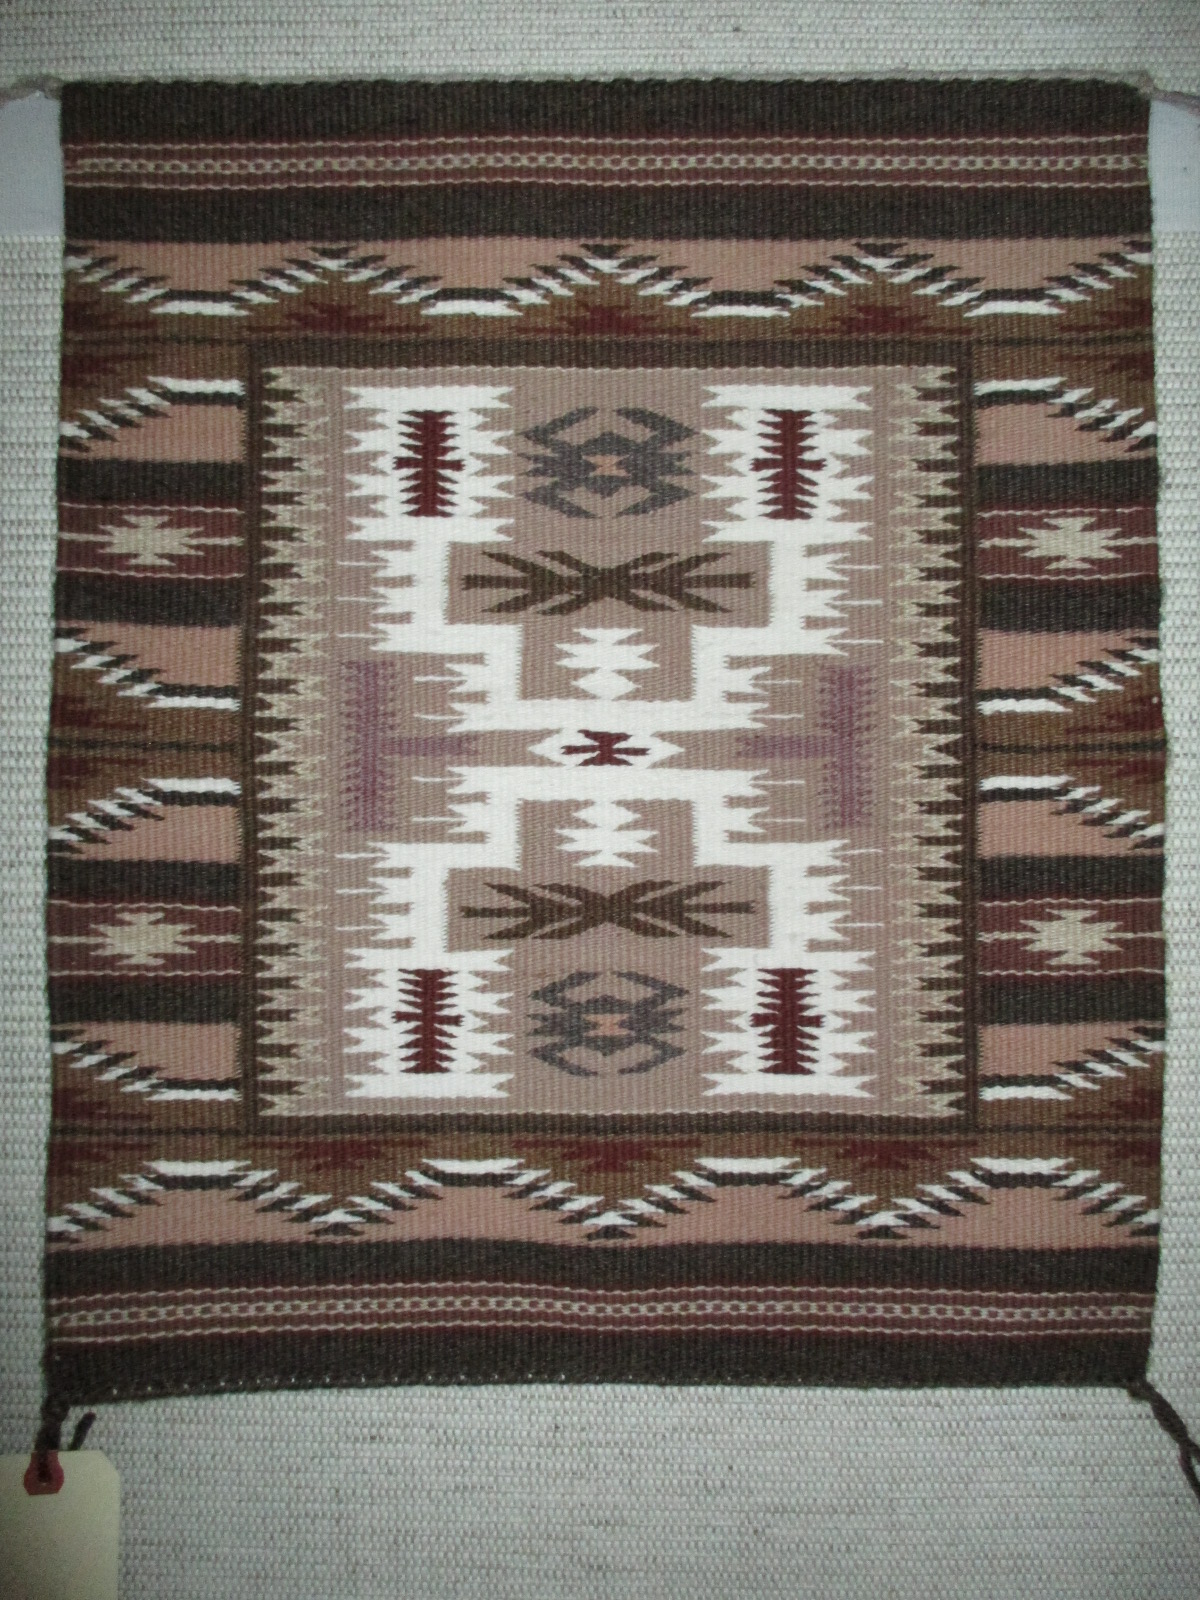 Small Navajo Weaving - '2 in 1' Storm Pattern inside Wide Ruins by Ruth Nellwood $385-